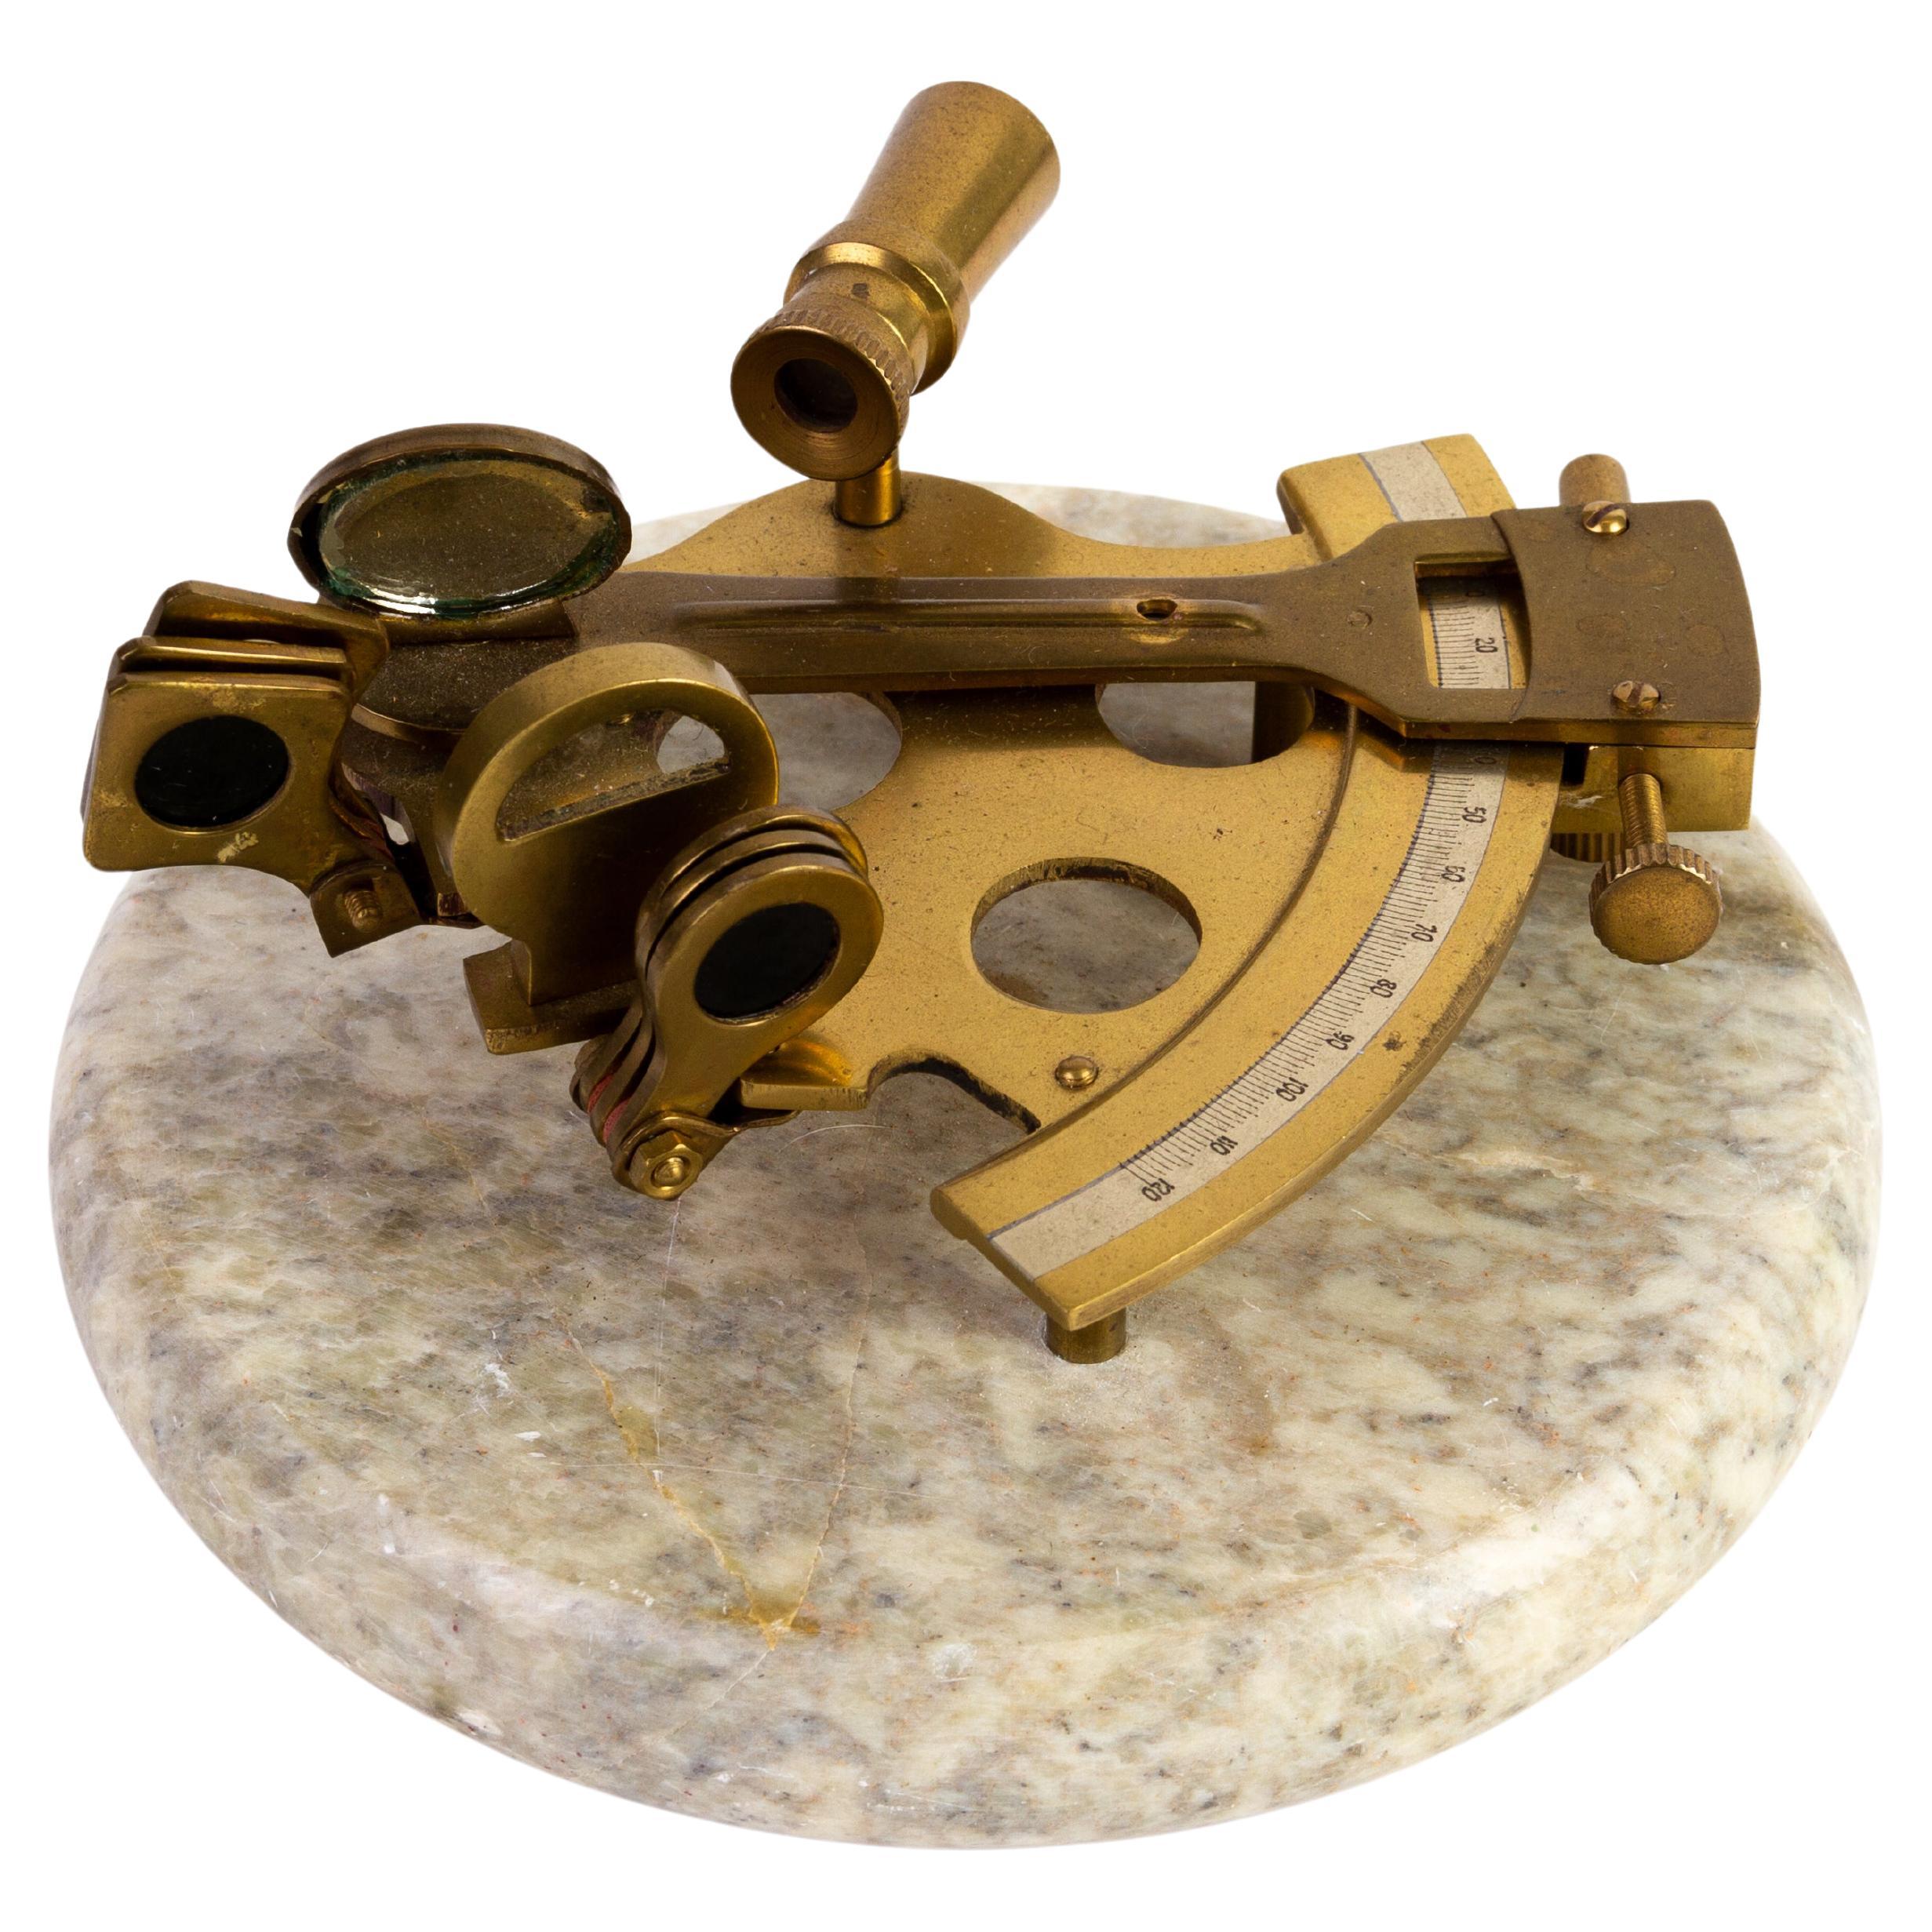 What is a brass sextant? - Questions & Answers